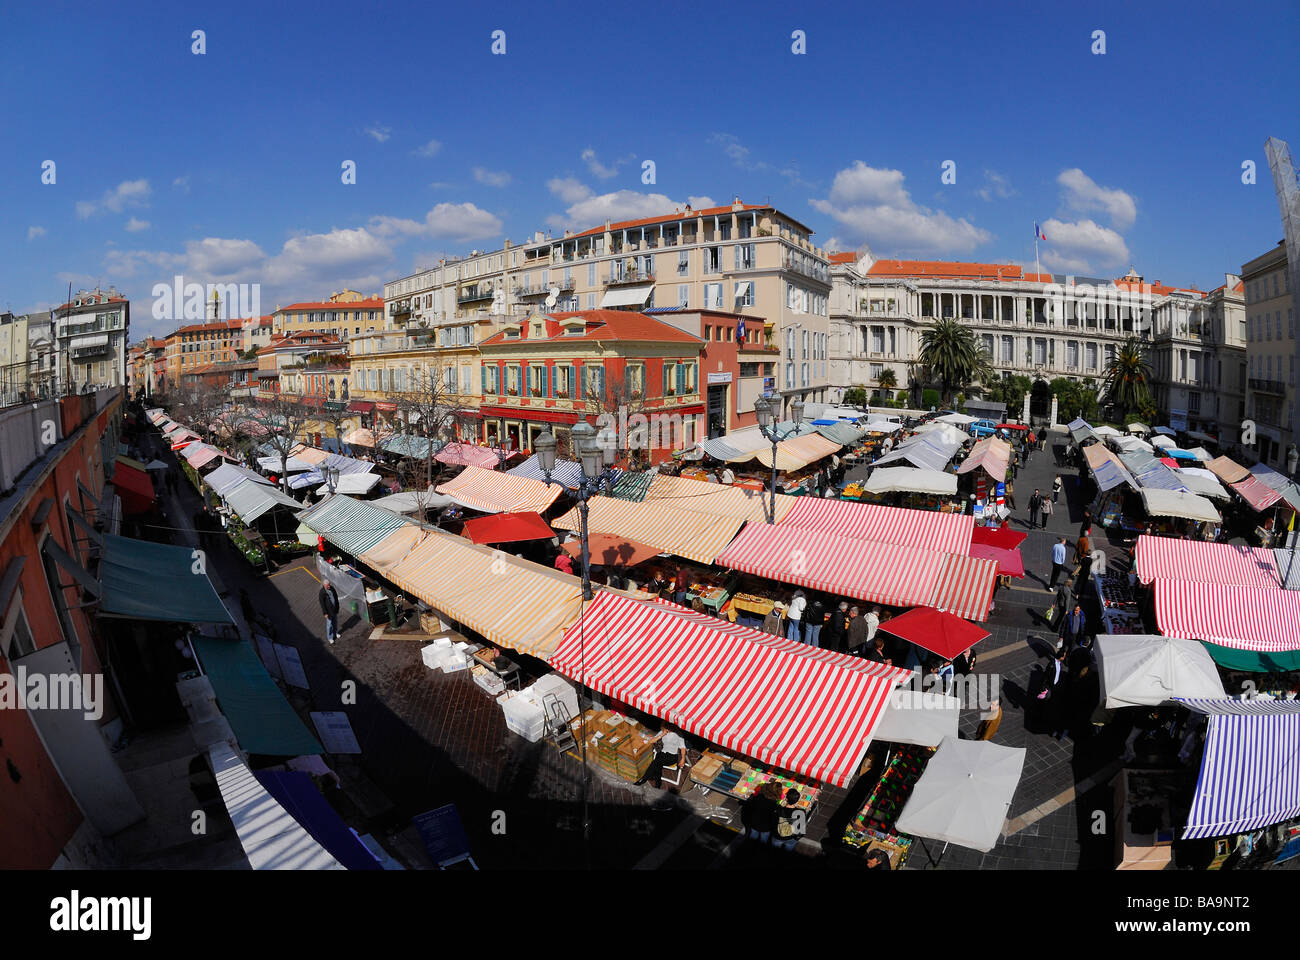 Street market in old town of France, Cote d'Azur, France Stock Photo